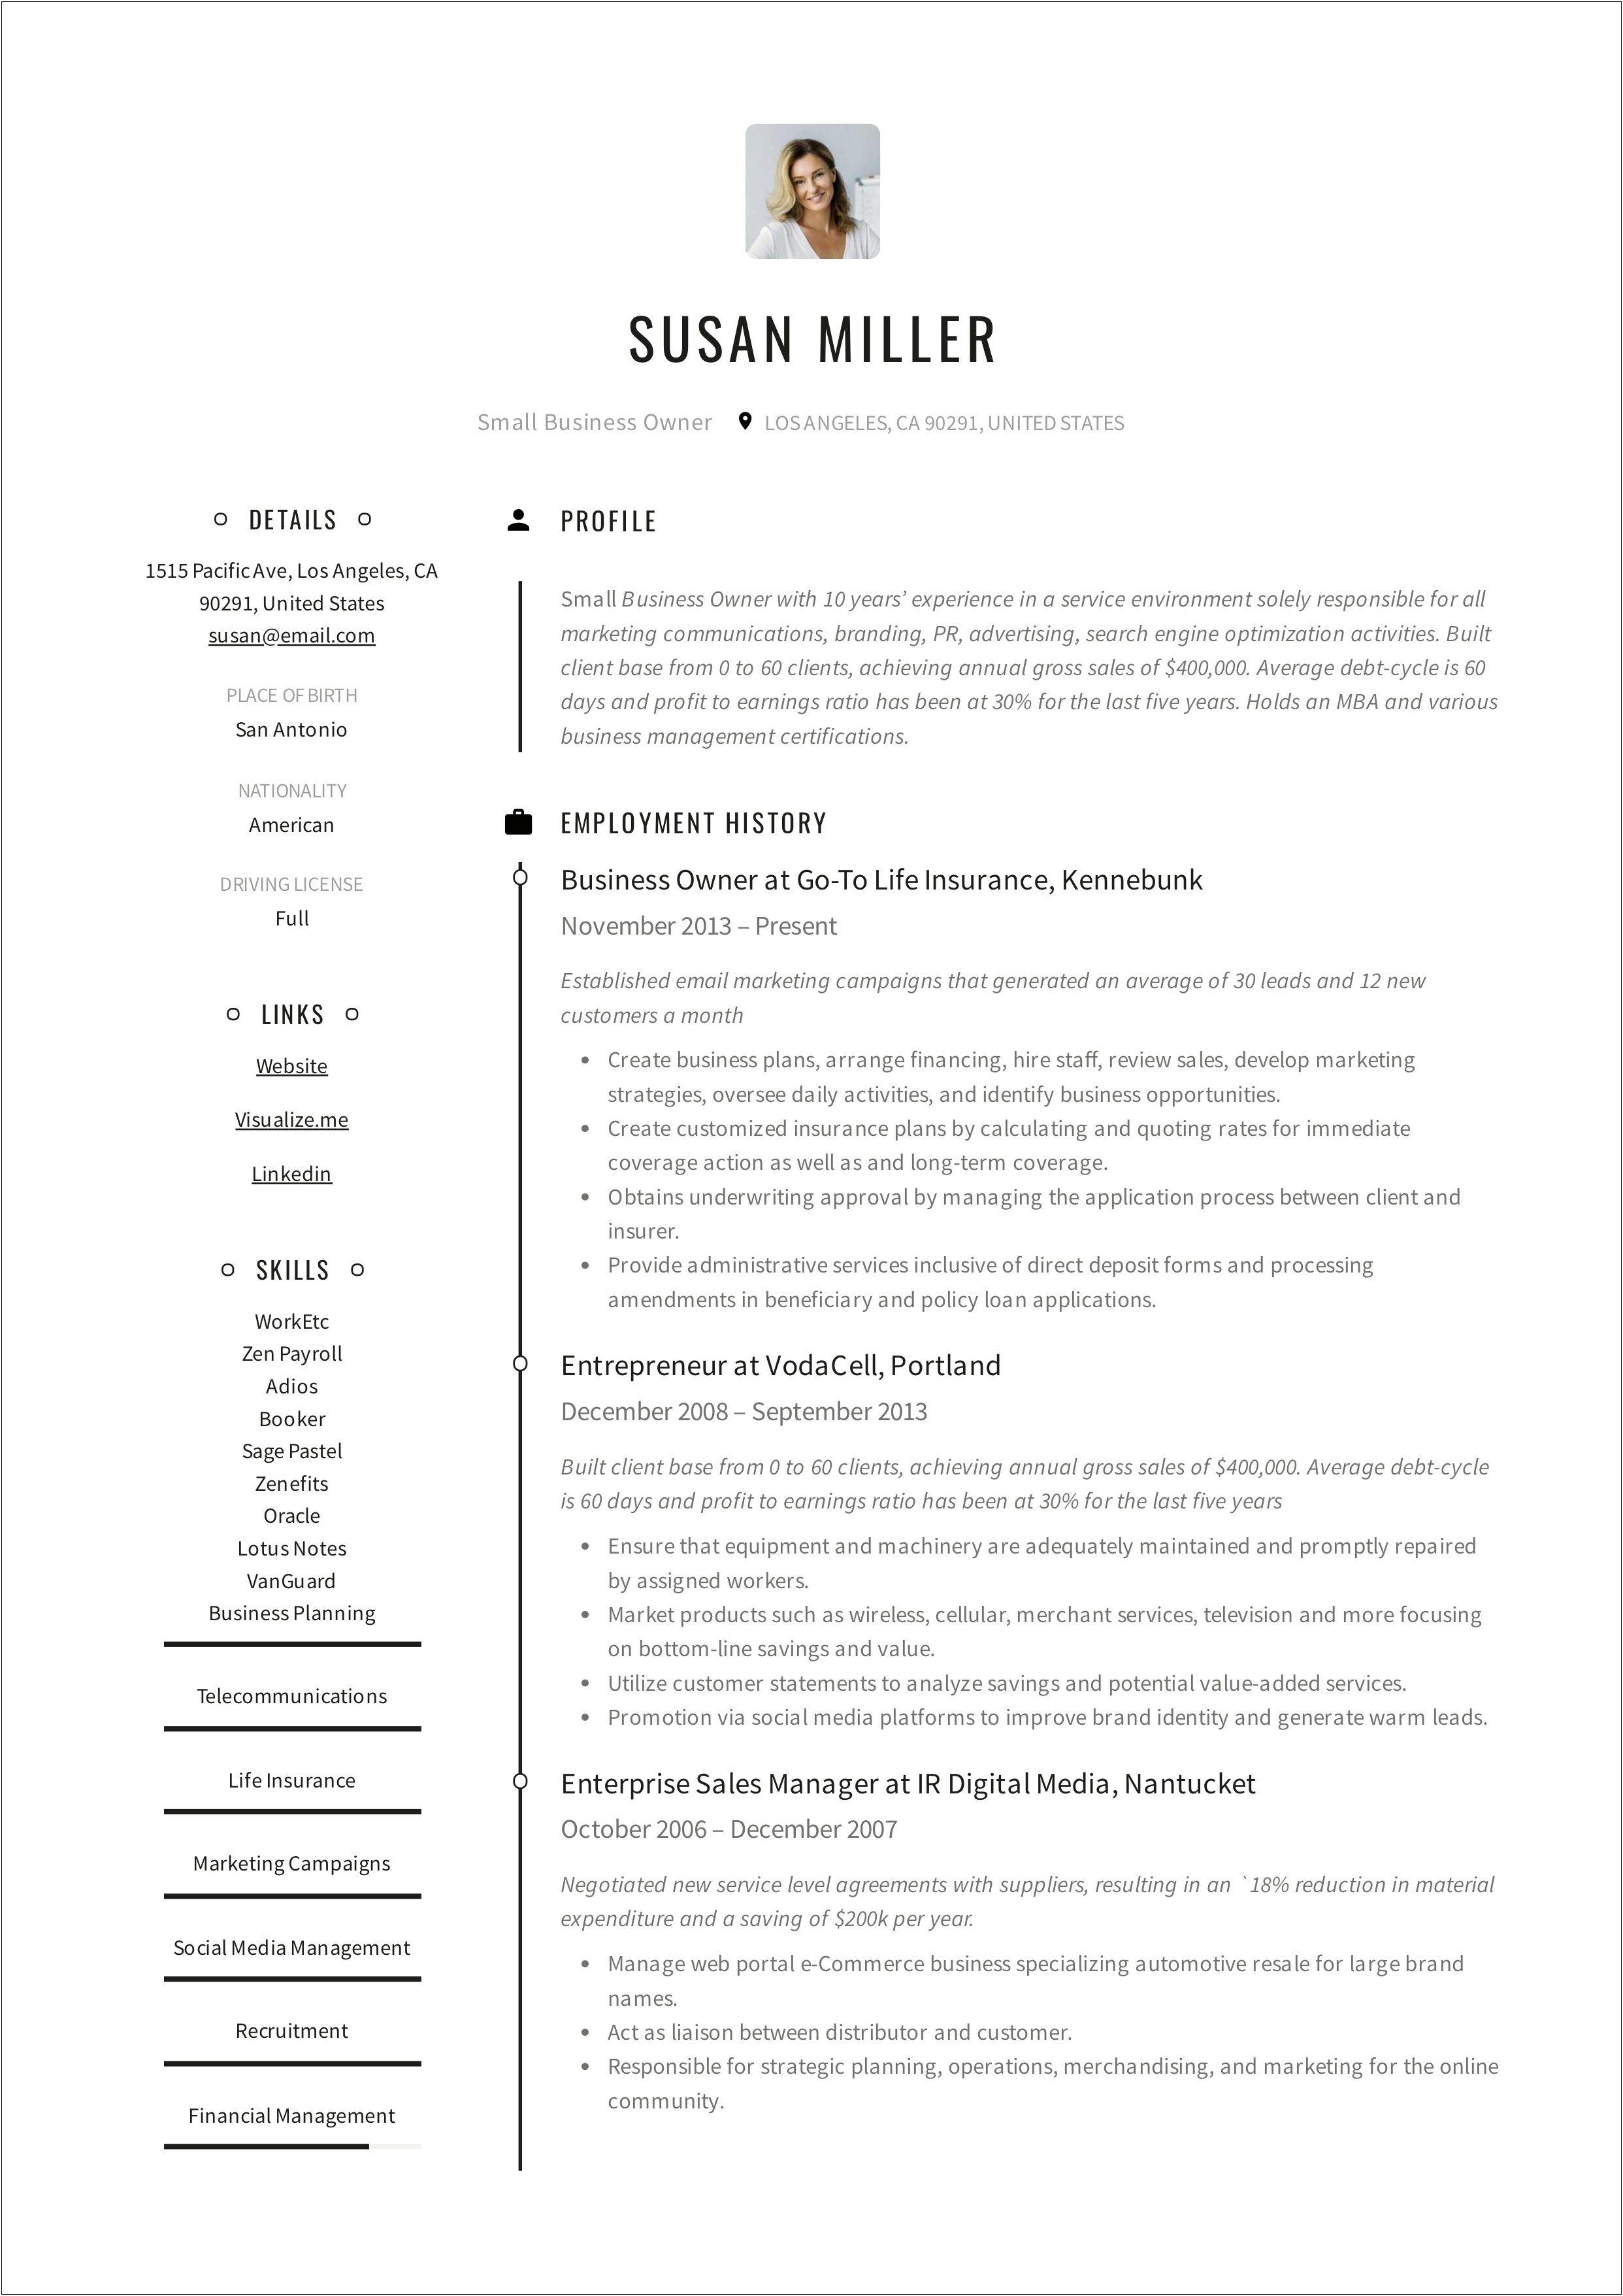 Resume Samples For Small Business Owner Objective